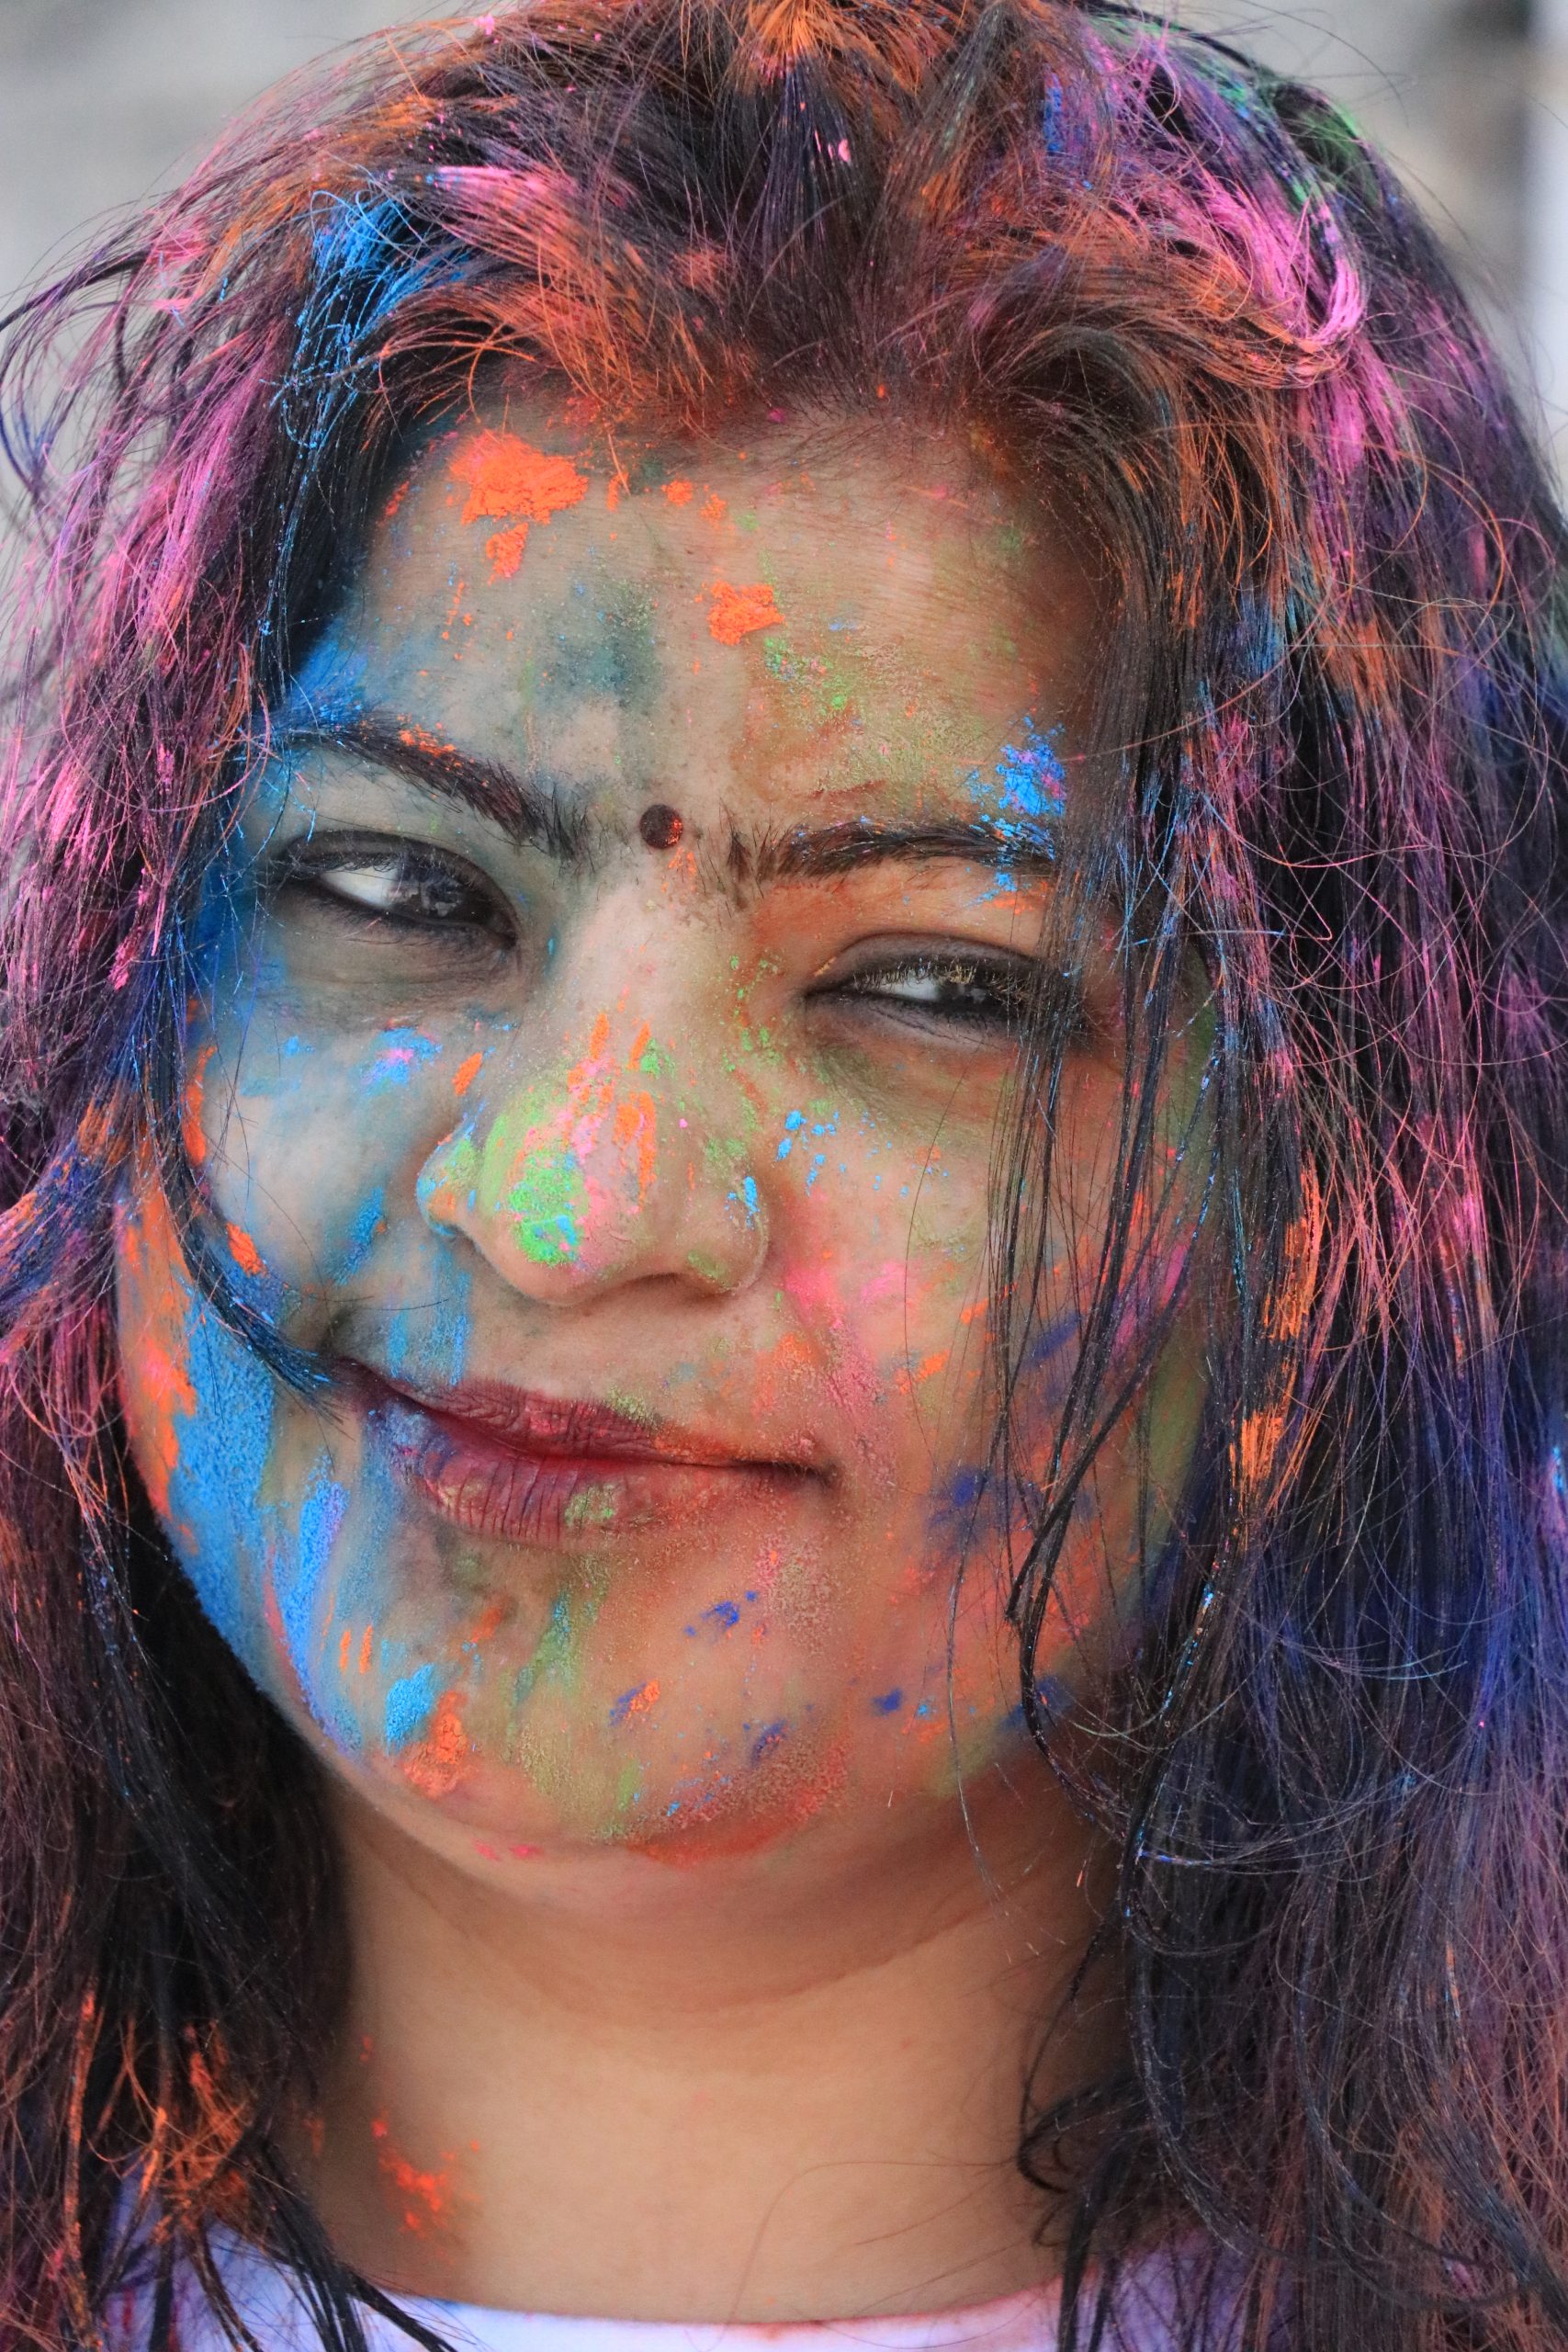 Girl posing with Holi colors on her face